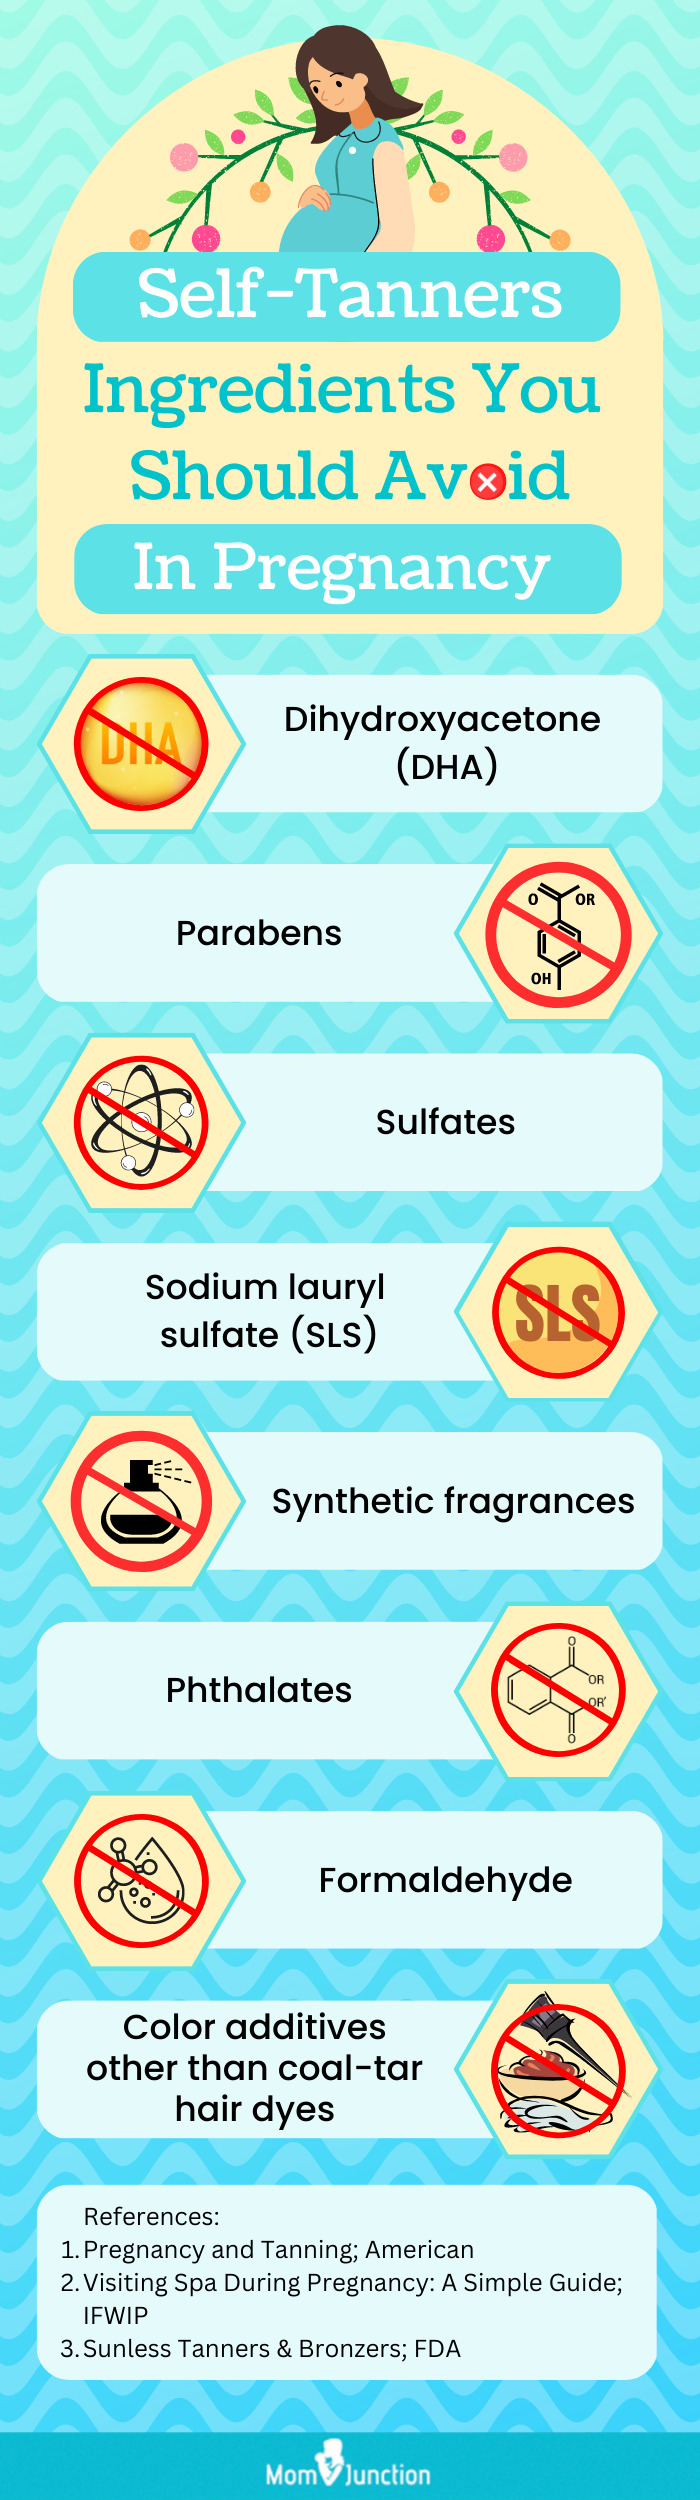 Self-Tanners Ingredients You Should Avoid In Pregnancy (infographic)